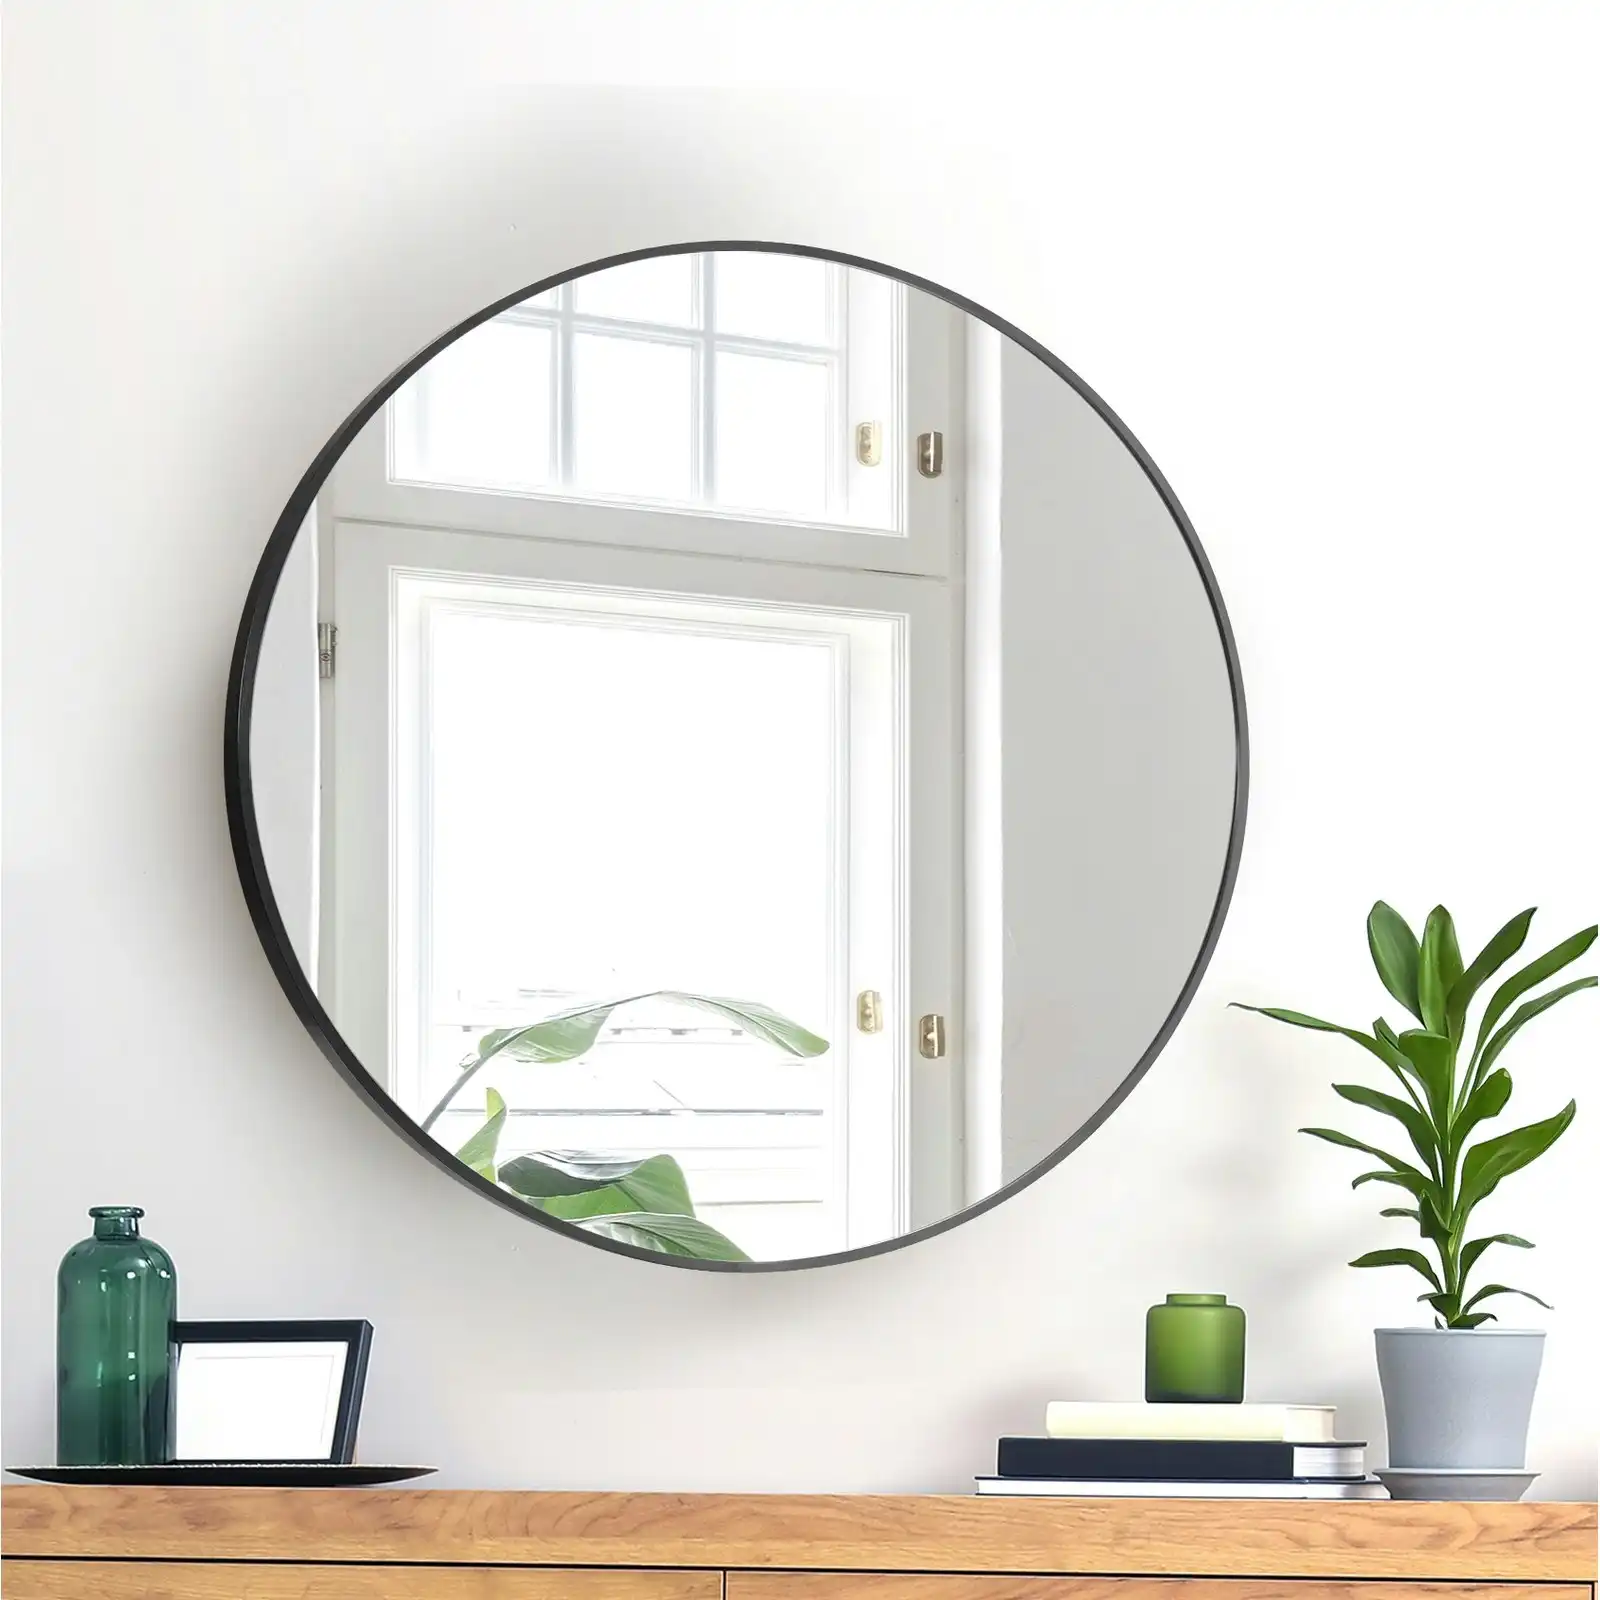 Oikiture Wall Mirrors Round Makeup Mirror Vanity Home Decor 50cm Black Bedroom